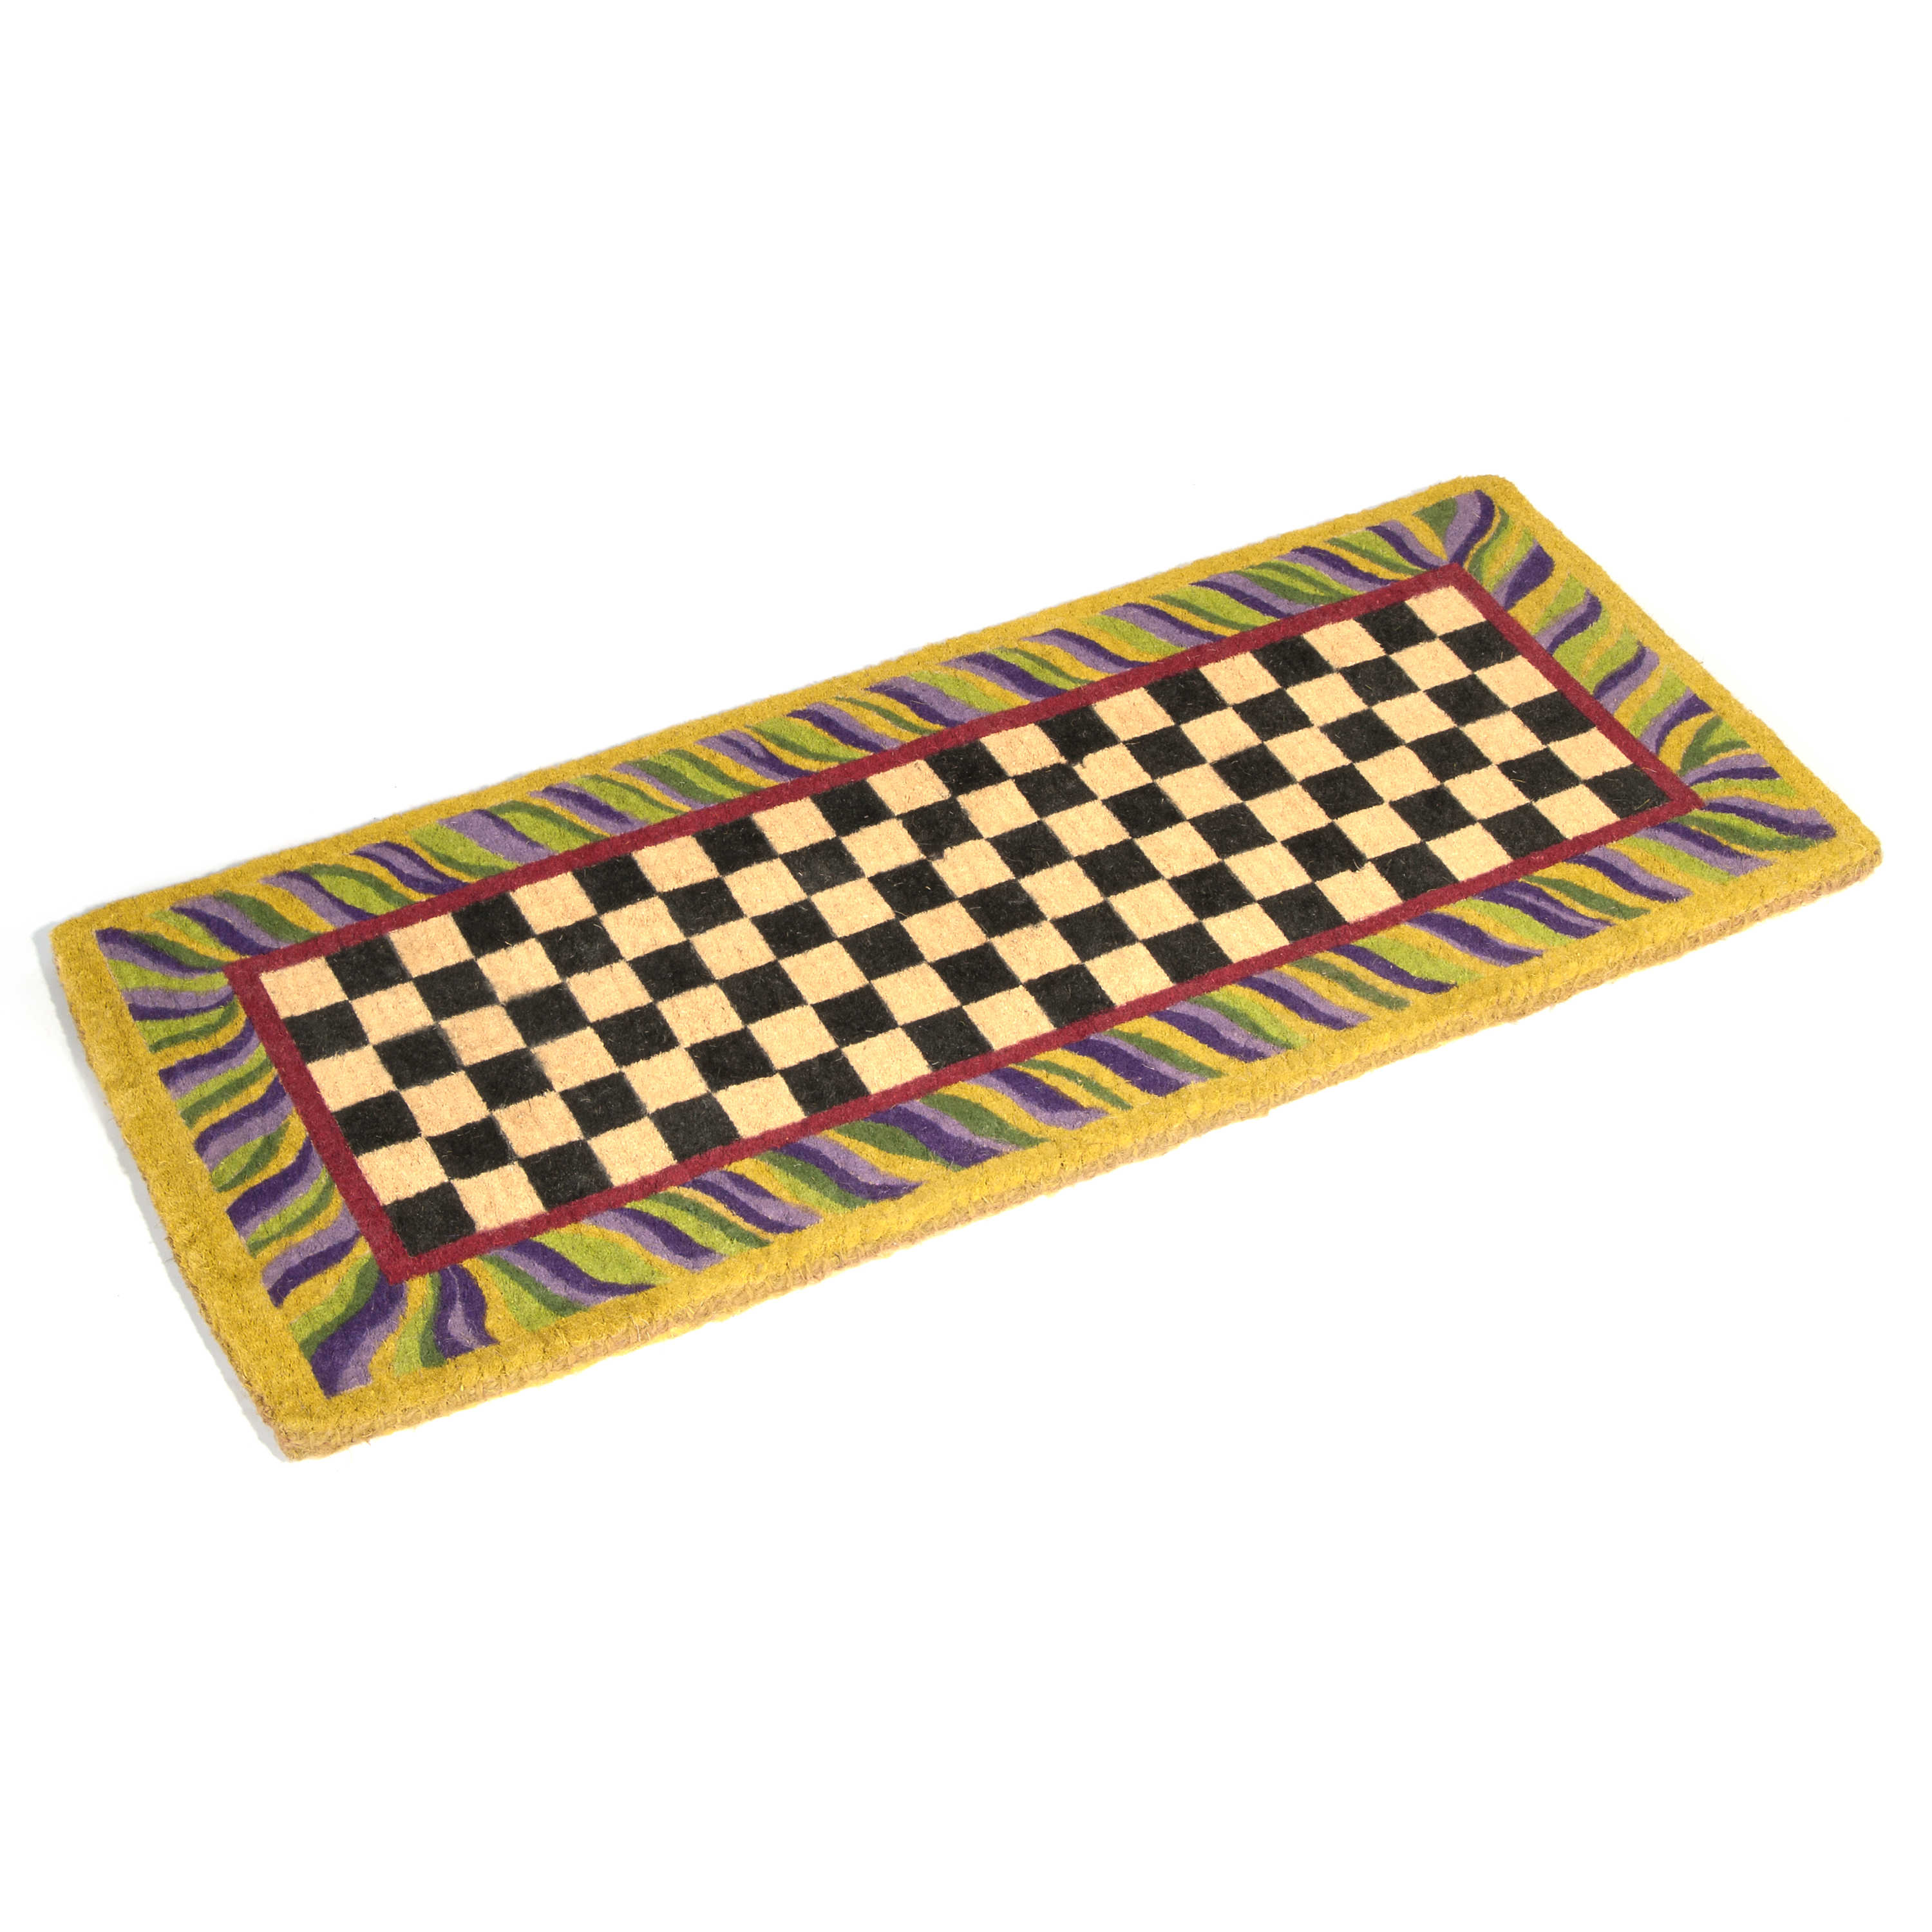 Courtly Check Double Door Entrance Mat mackenzie-childs Panama 0